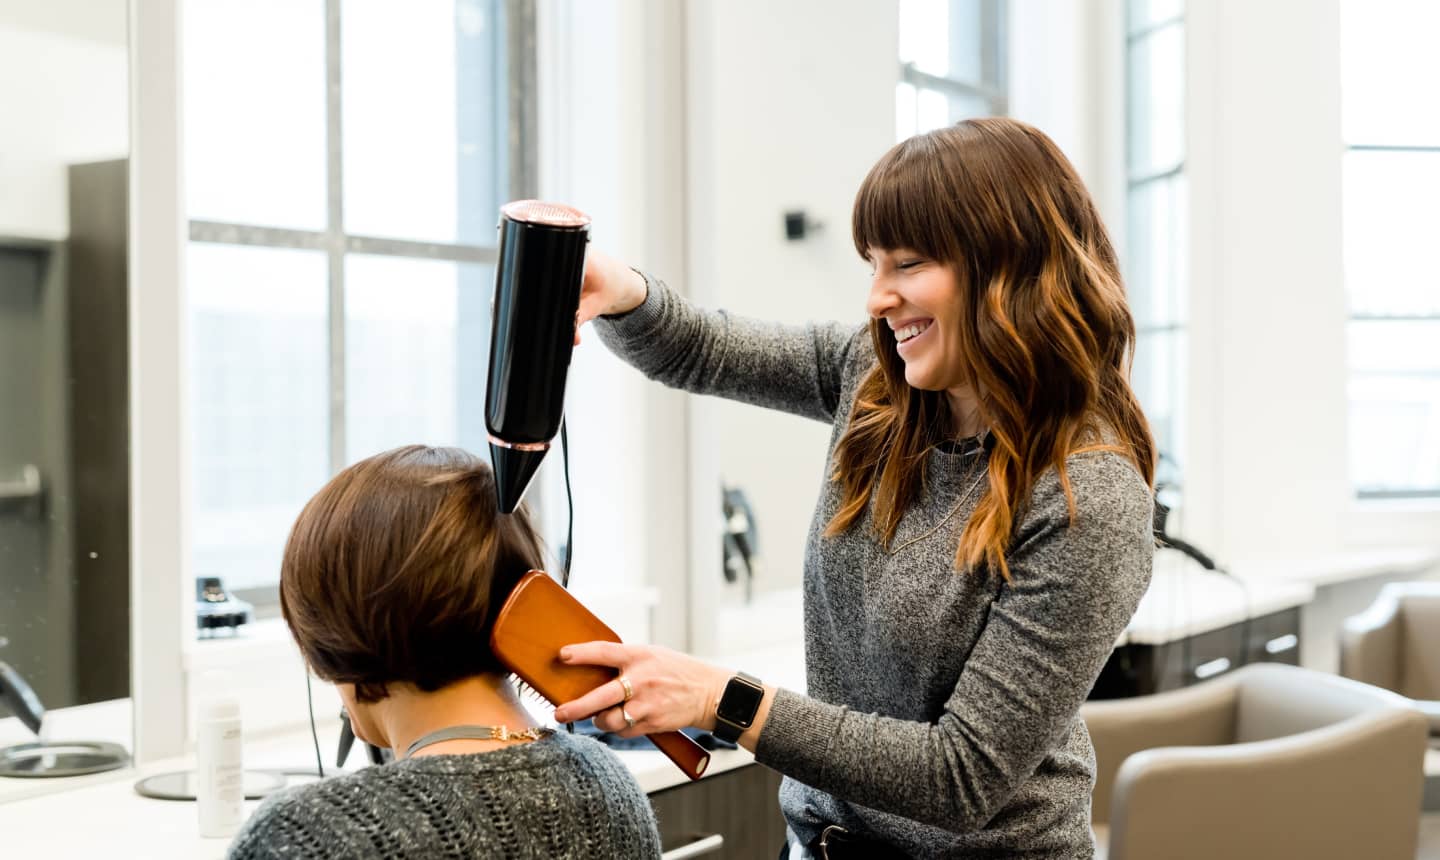 A smiling hairdresser blowdries and brushes the hair of a seated client inside a hair salon.